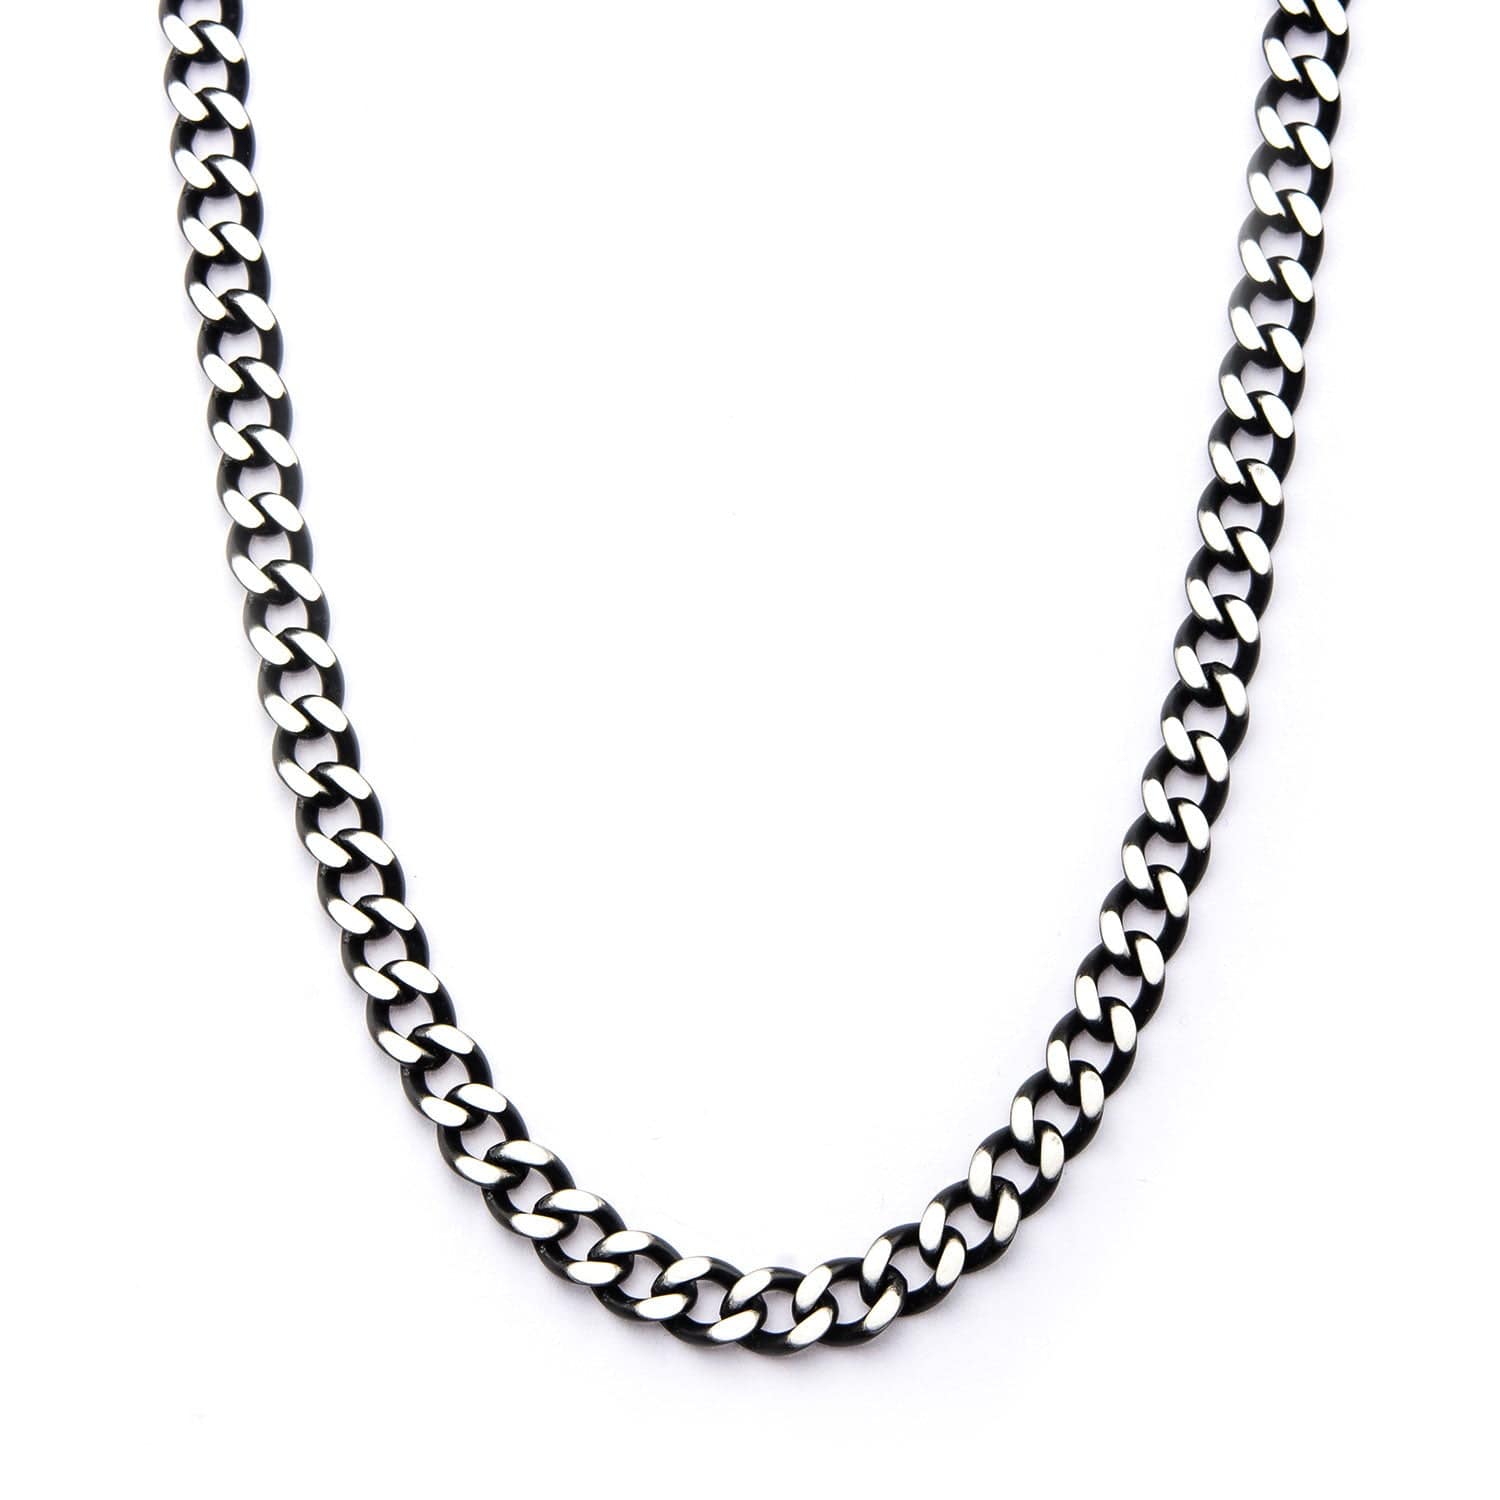 INOX JEWELRY Chains Black and Silver Tone Stainless Steel Denim Fade Collection Diamond Cut Chain NSTC7620P-22